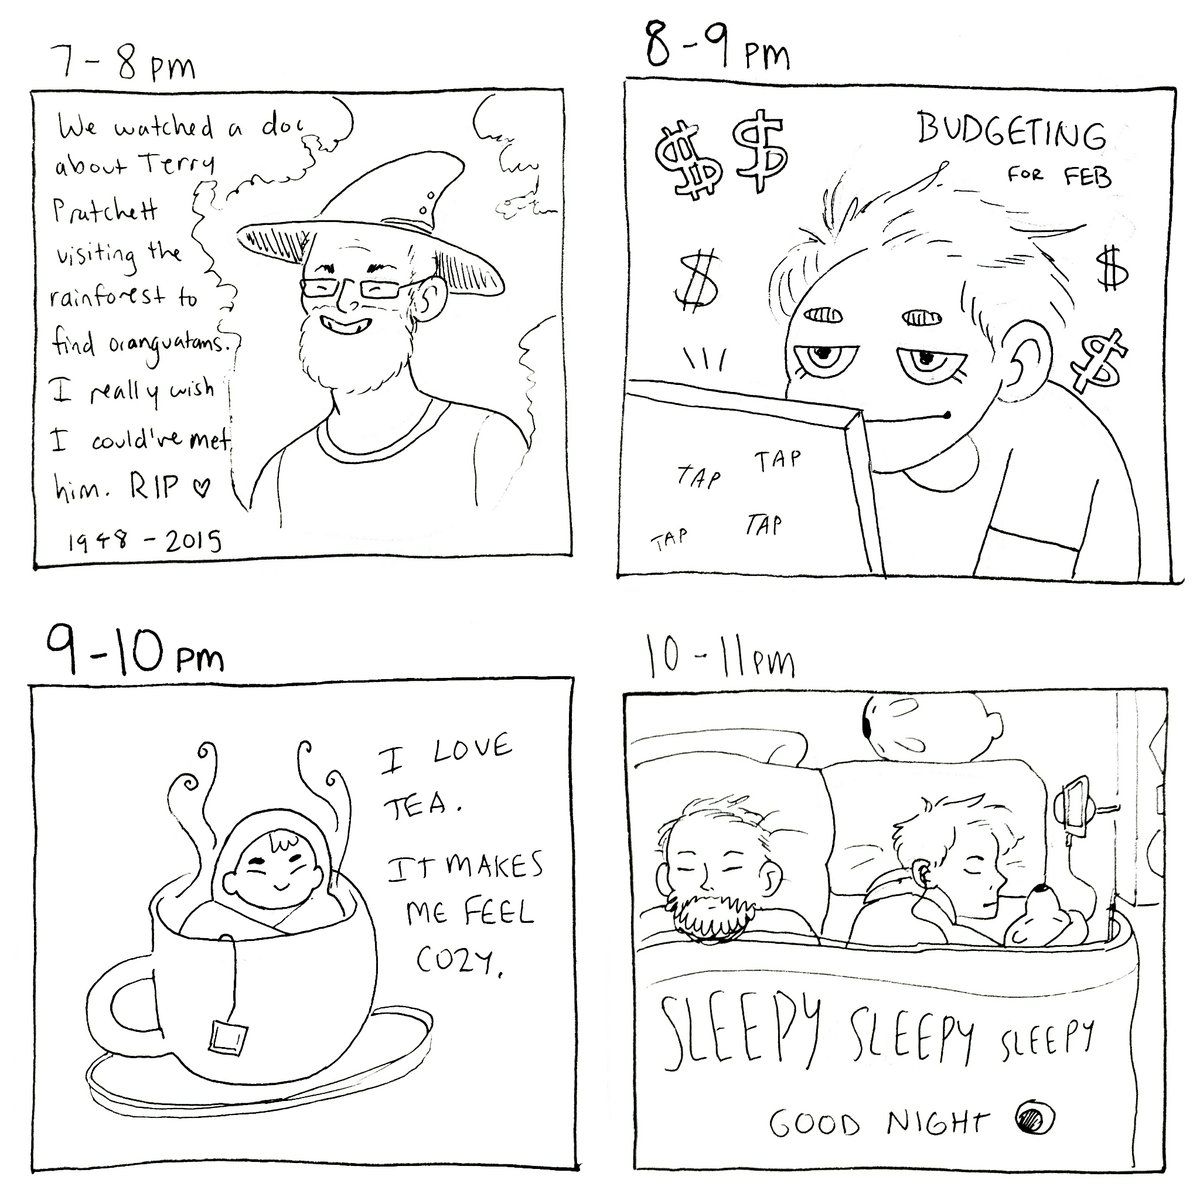 annd here's my 2018 hourly comics, which I cannot find the thread for lol 